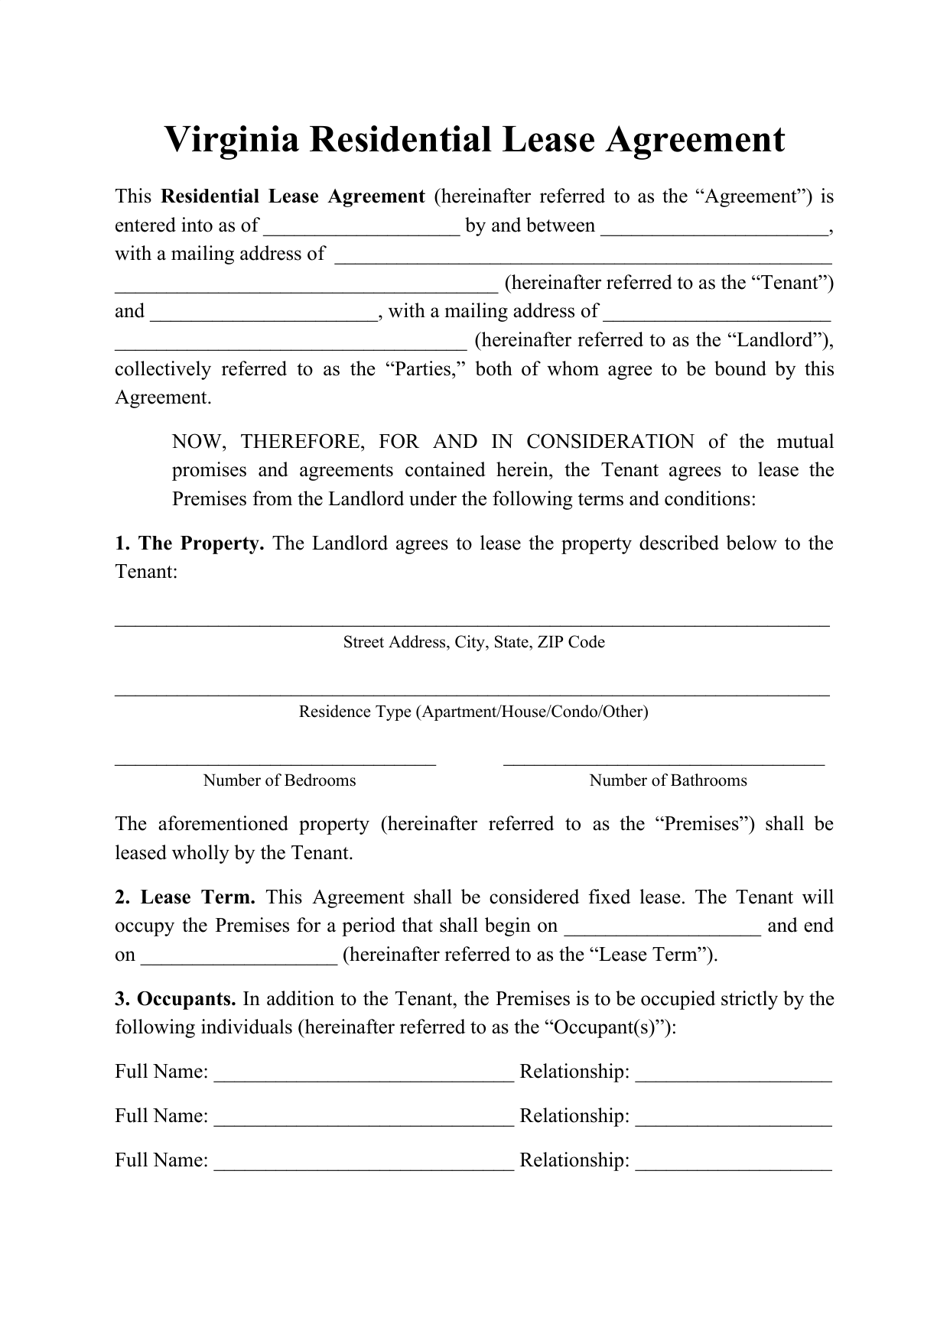 virginia-residential-lease-agreement-template-fill-out-sign-online-and-download-pdf